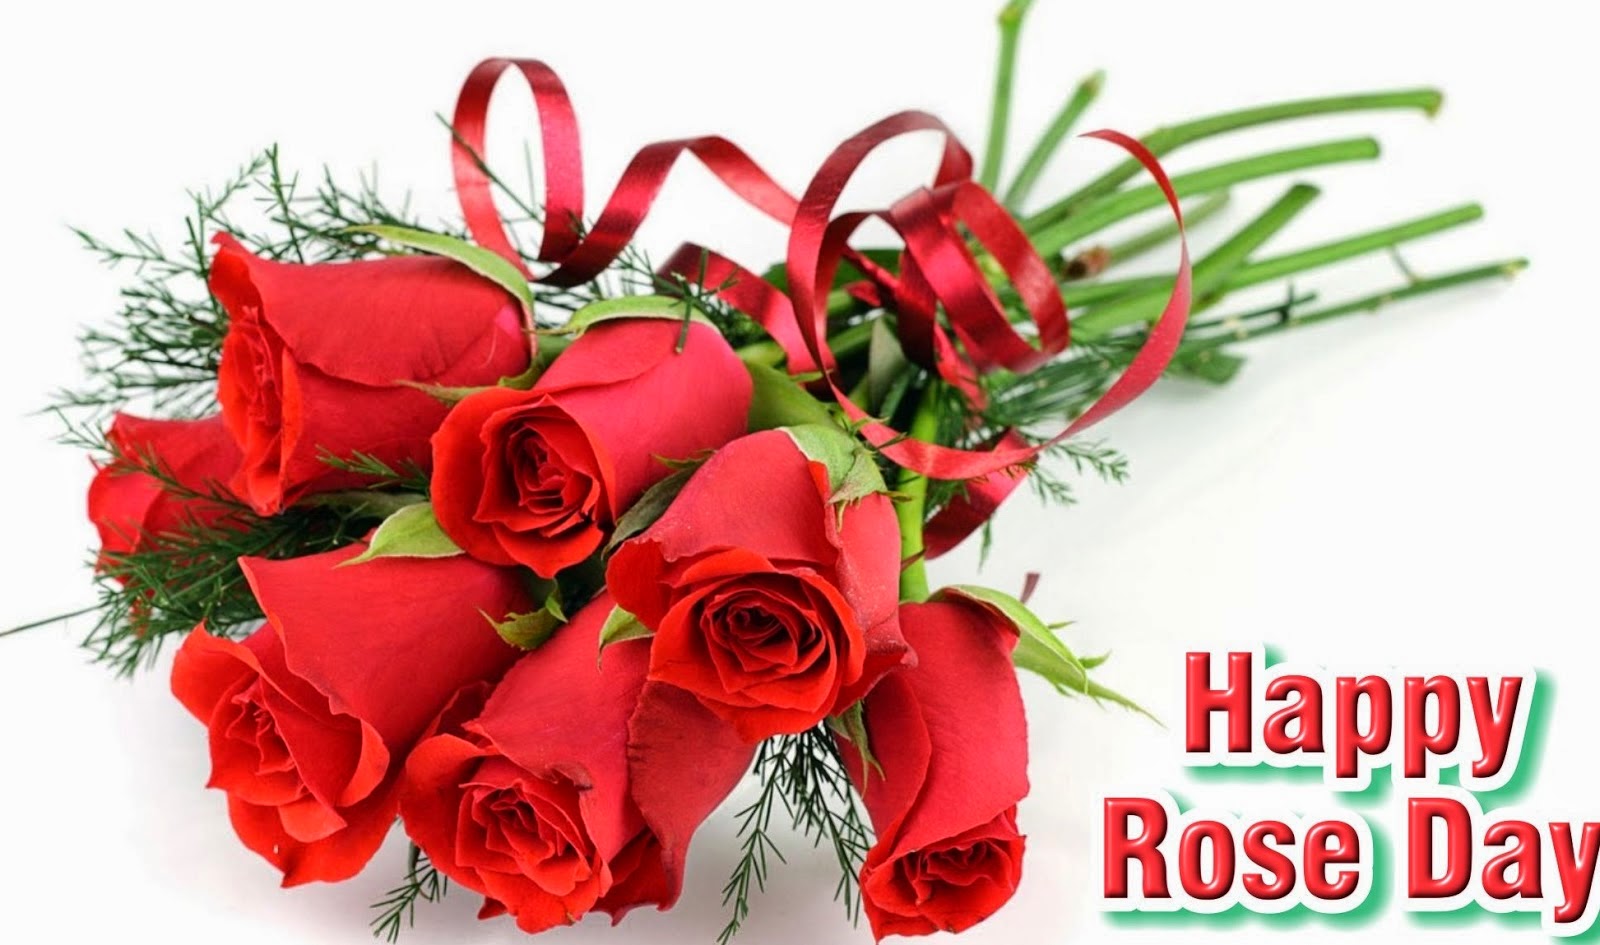 Rose day whatsapp and Facebook status messages 3